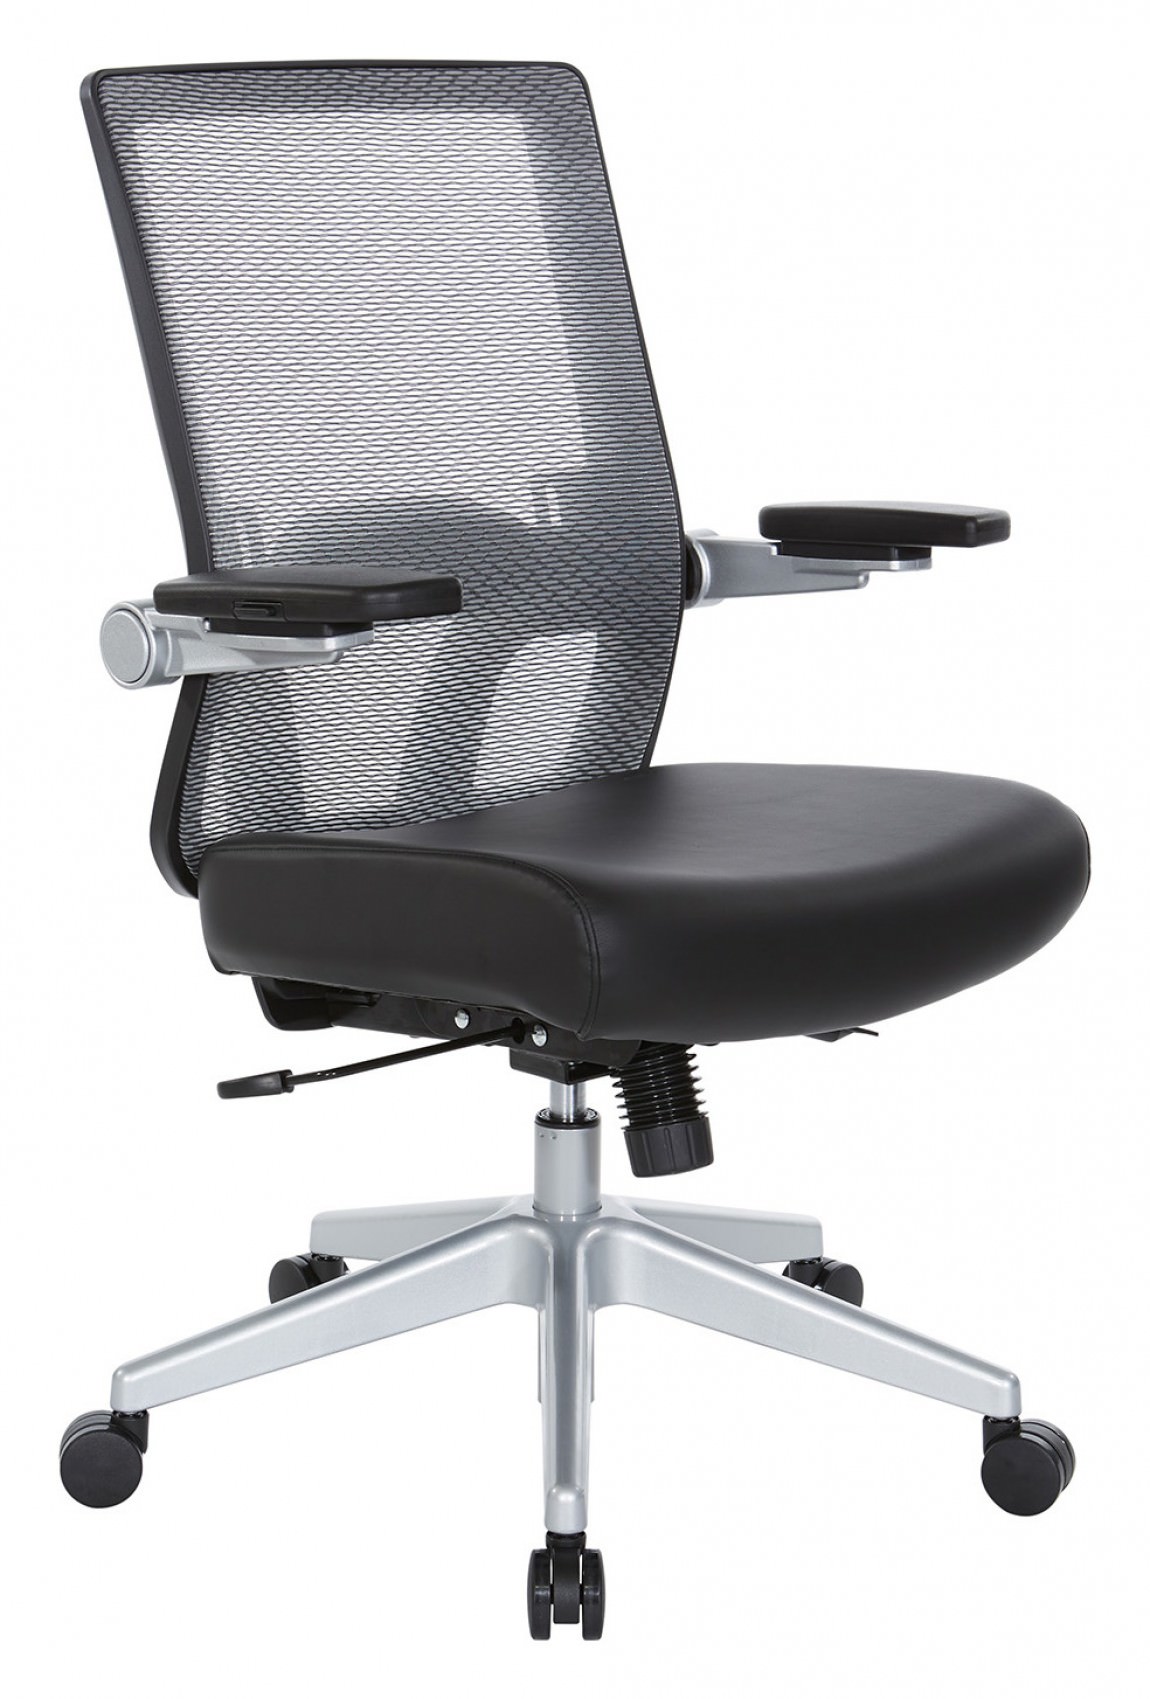 Ergonomic Chair with Leather Seat and Mesh Back by Office Star